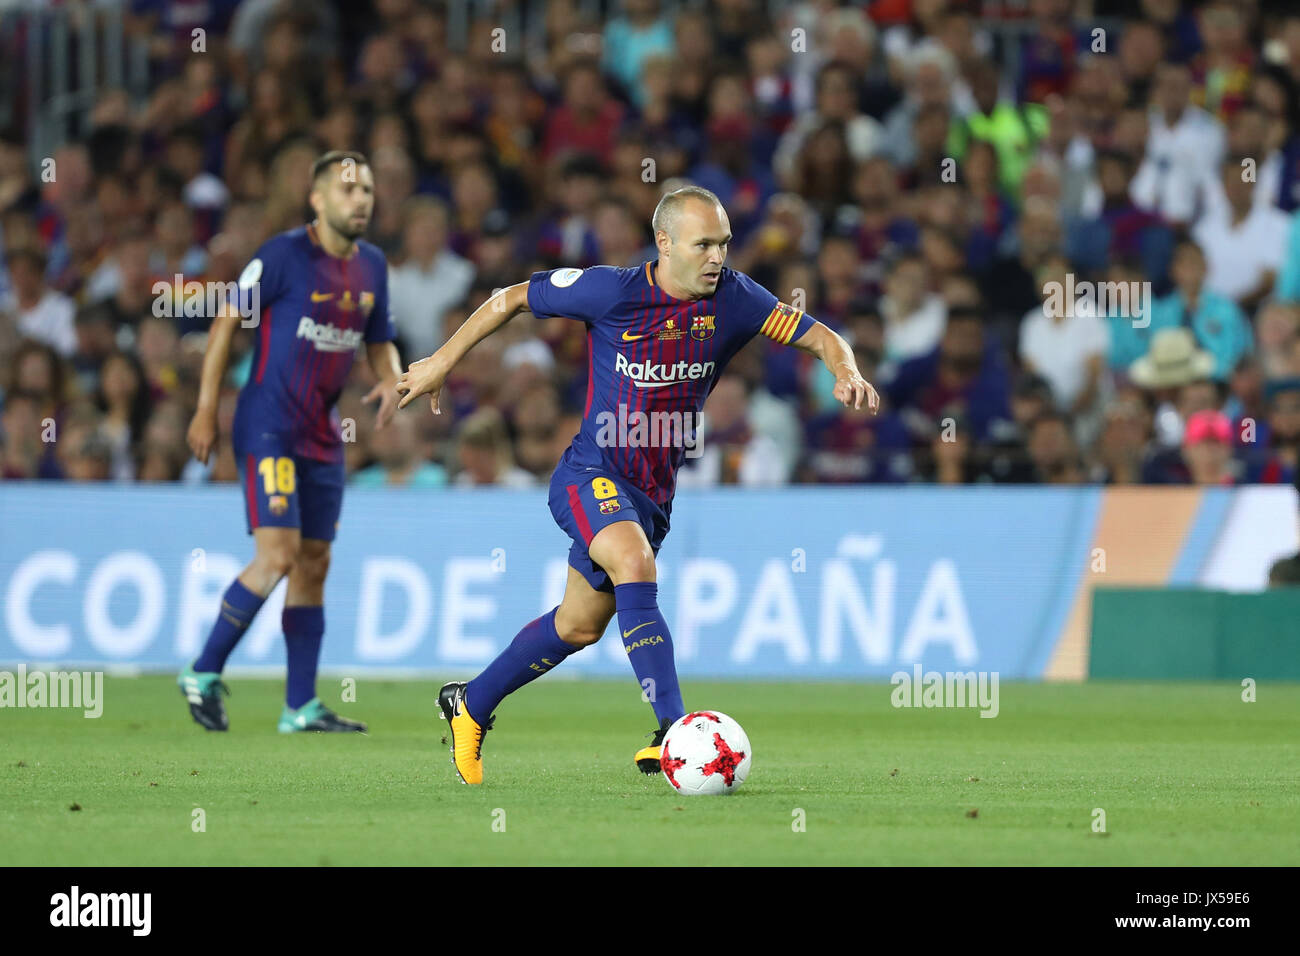 Barcelona, Spain. 13th Aug, 2017. ANDRES INIESTA of FC Barcelona during the Spanish Super Cup football match between FC Barcelona and Real Madrid on August 13, 2017 at Camp Nou stadium in Barcelona, Spain. Credit: Manuel Blondeau/ZUMA Wire/Alamy Live News Stock Photo